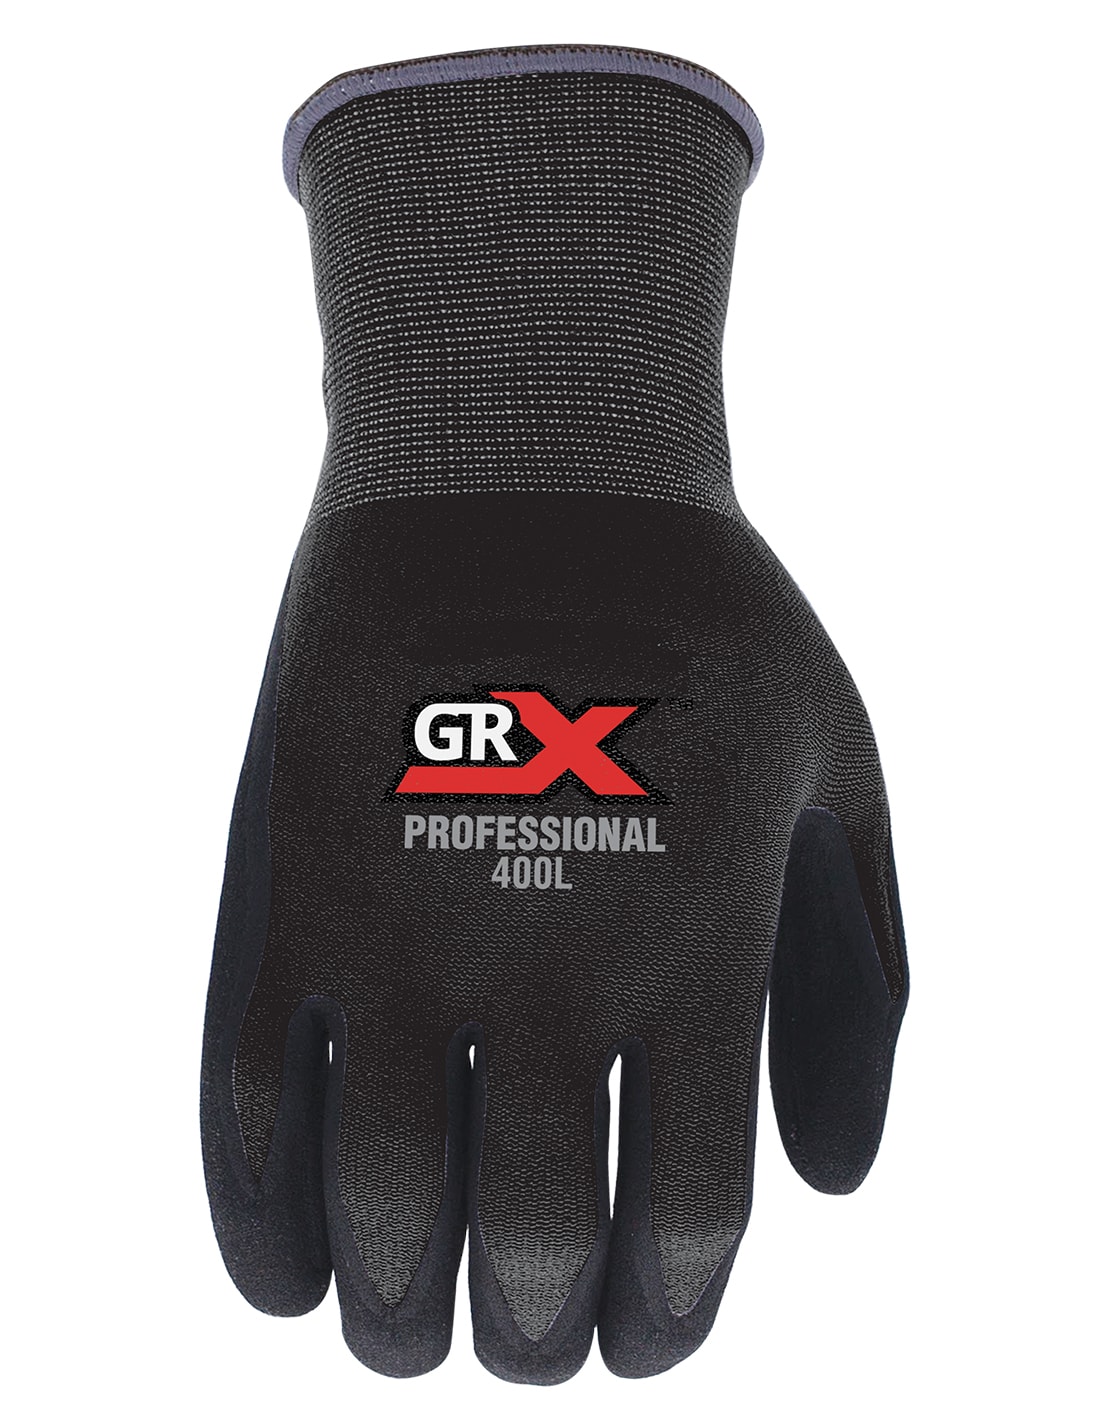 GRX ProSeries Gloves - Mechanical Hub  News, Product Reviews, Videos, and  Resources for today's contractors.